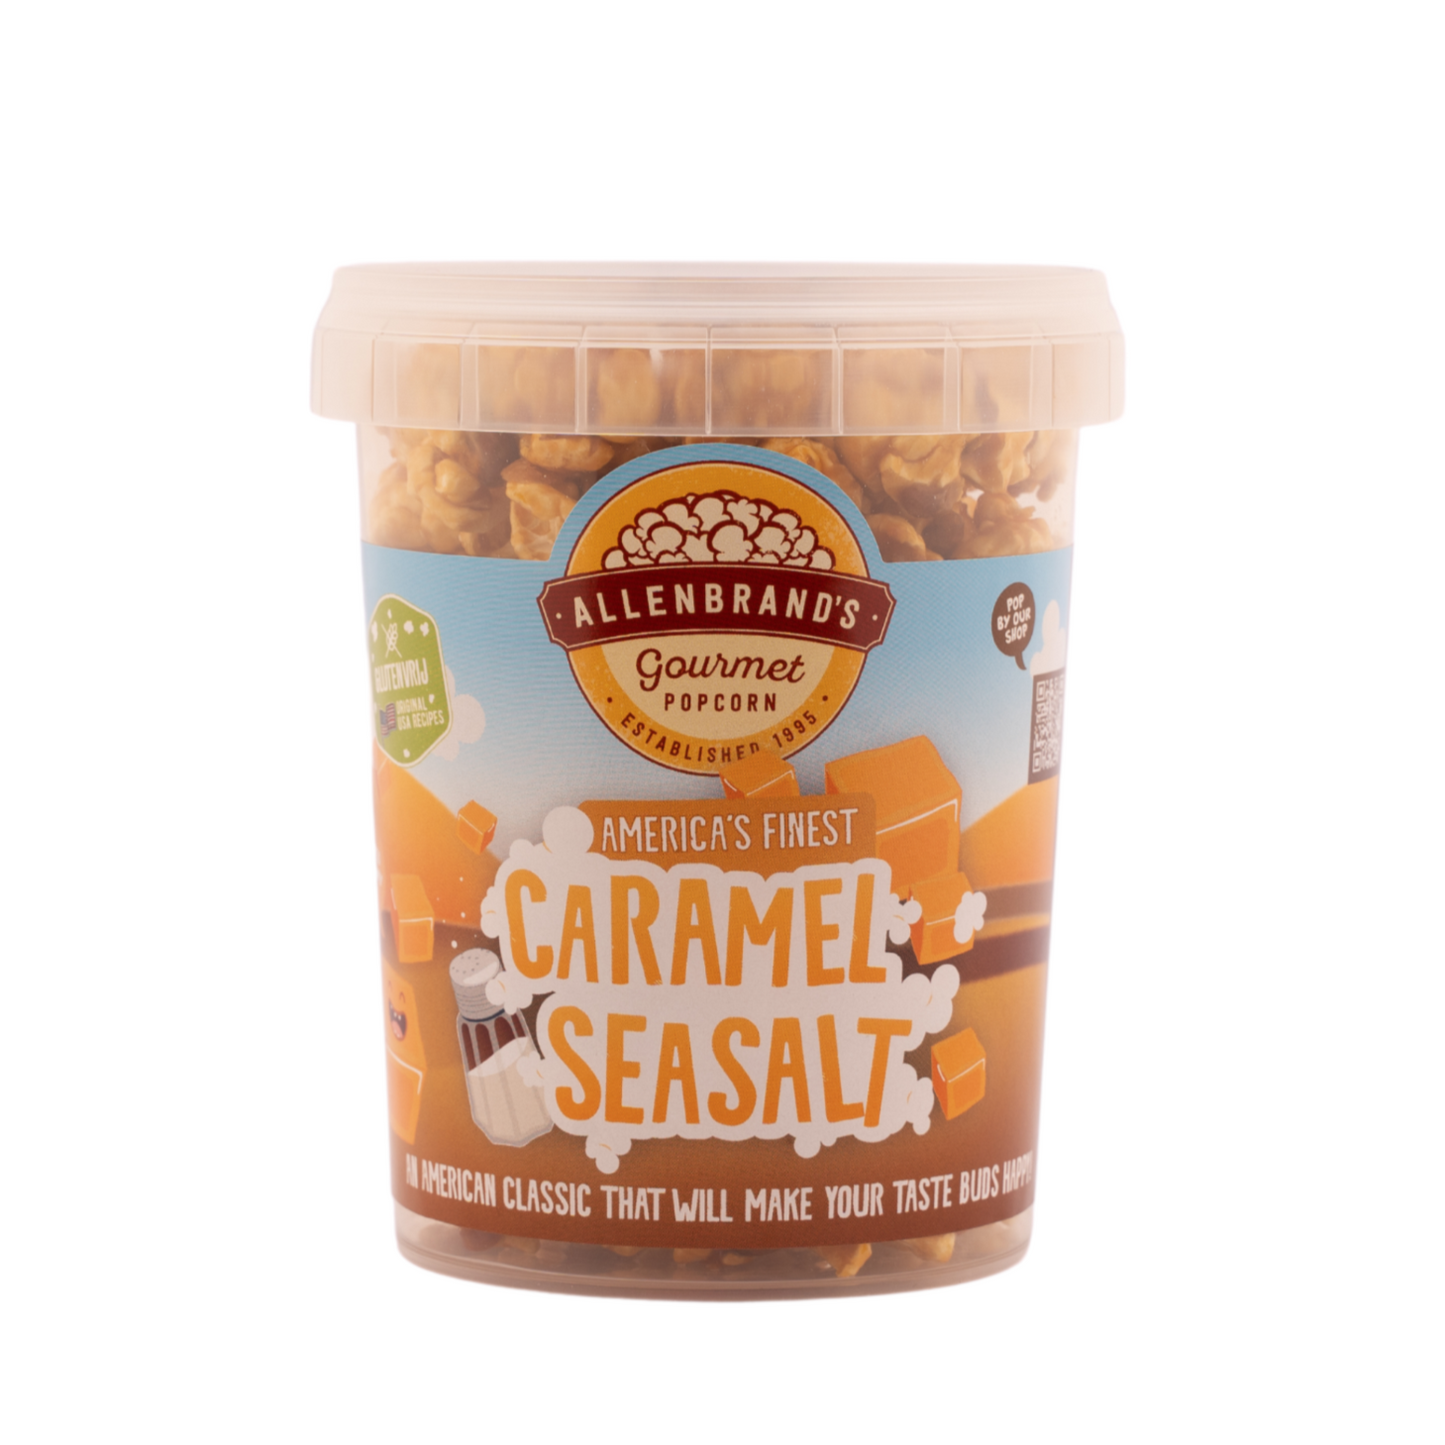 Caramel Sea Salt: An American classic that will make your taste buds happy!